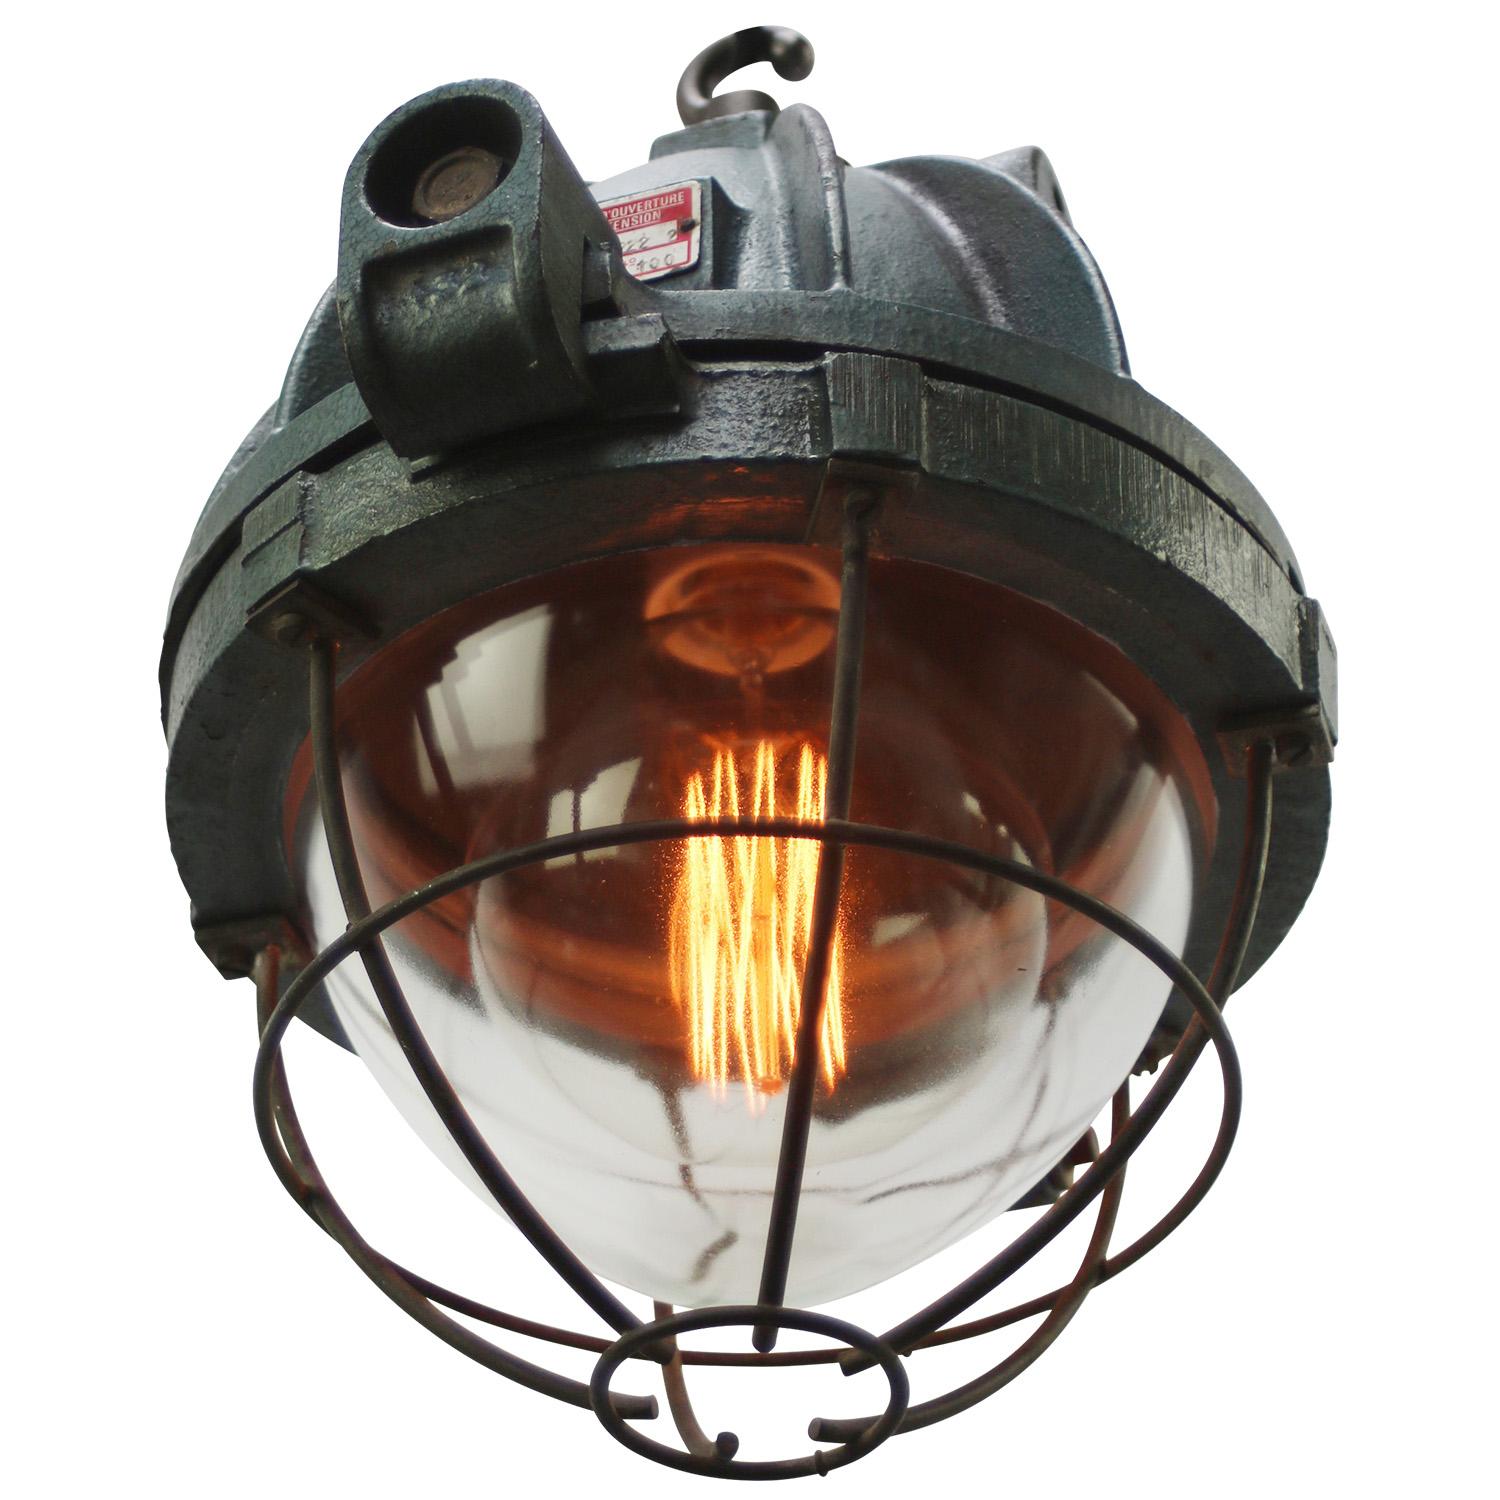 French factory pendant from 1967 by EEA, France
Green cast iron
Clear glass with cage

Heavy metal!!!

Weight: 14.60 kg / 32.2 lb

Priced per individual item. All lamps have been made suitable by international standards for incandescent light bulbs,